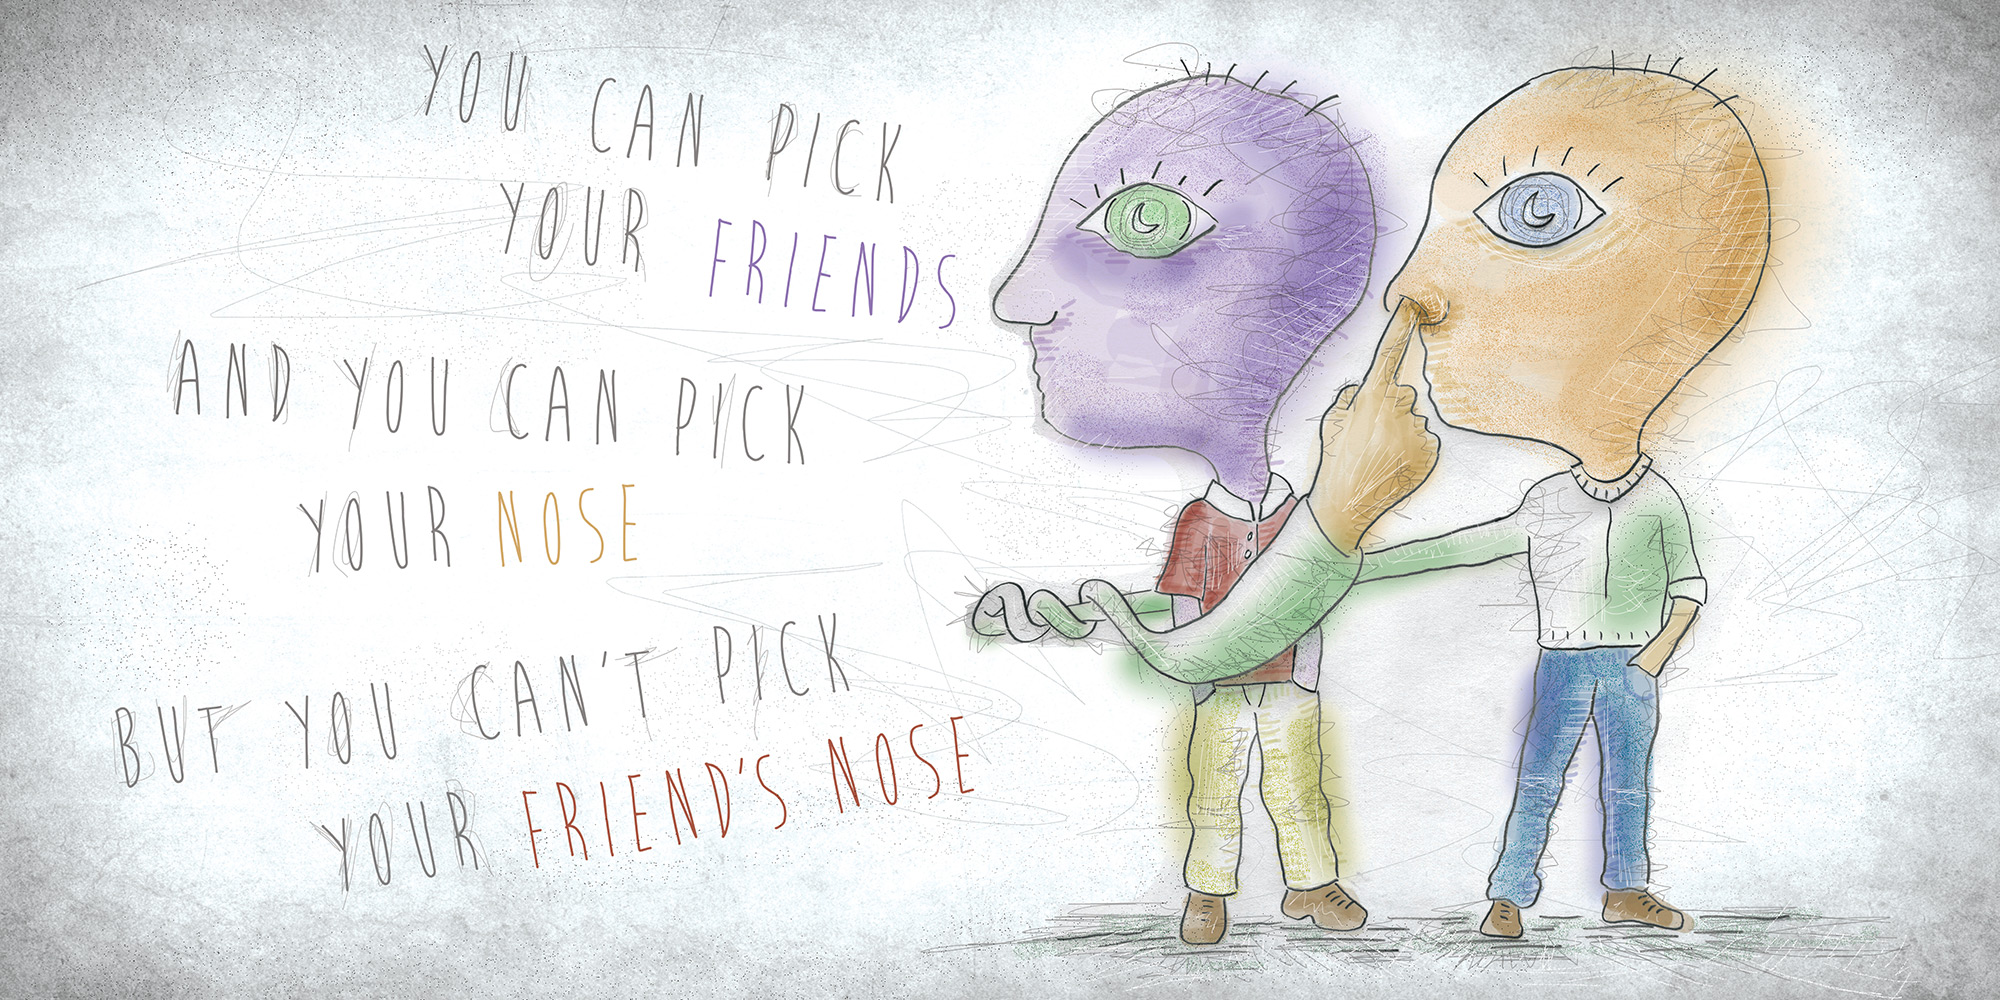 Jeff Kern design for "You Can Pick Your Nose"